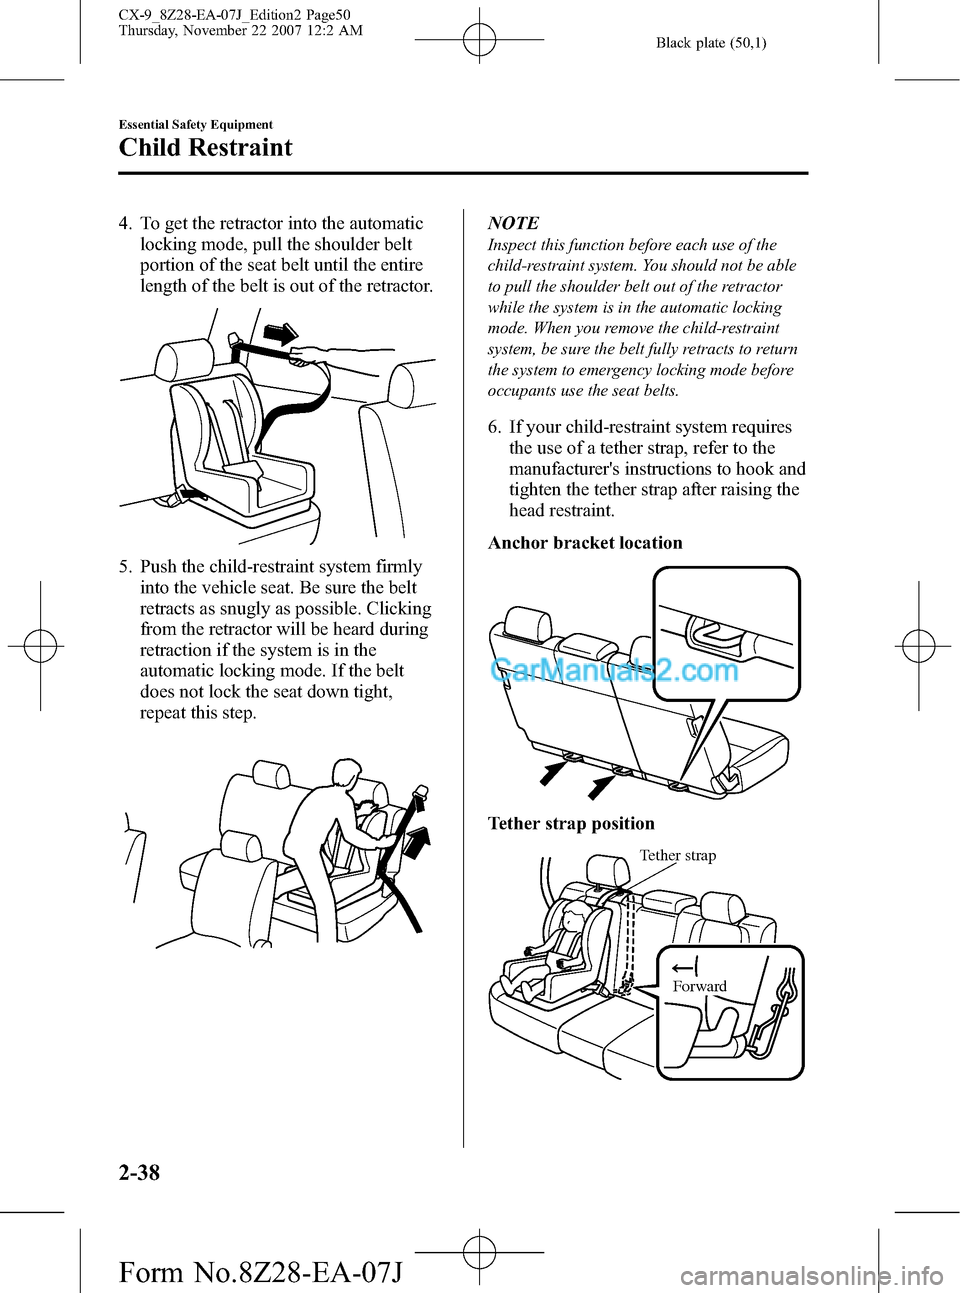 MAZDA MODEL CX-9 2008   (in English) Service Manual Black plate (50,1)
4. To get the retractor into the automatic
locking mode, pull the shoulder belt
portion of the seat belt until the entire
length of the belt is out of the retractor.
5. Push the chi